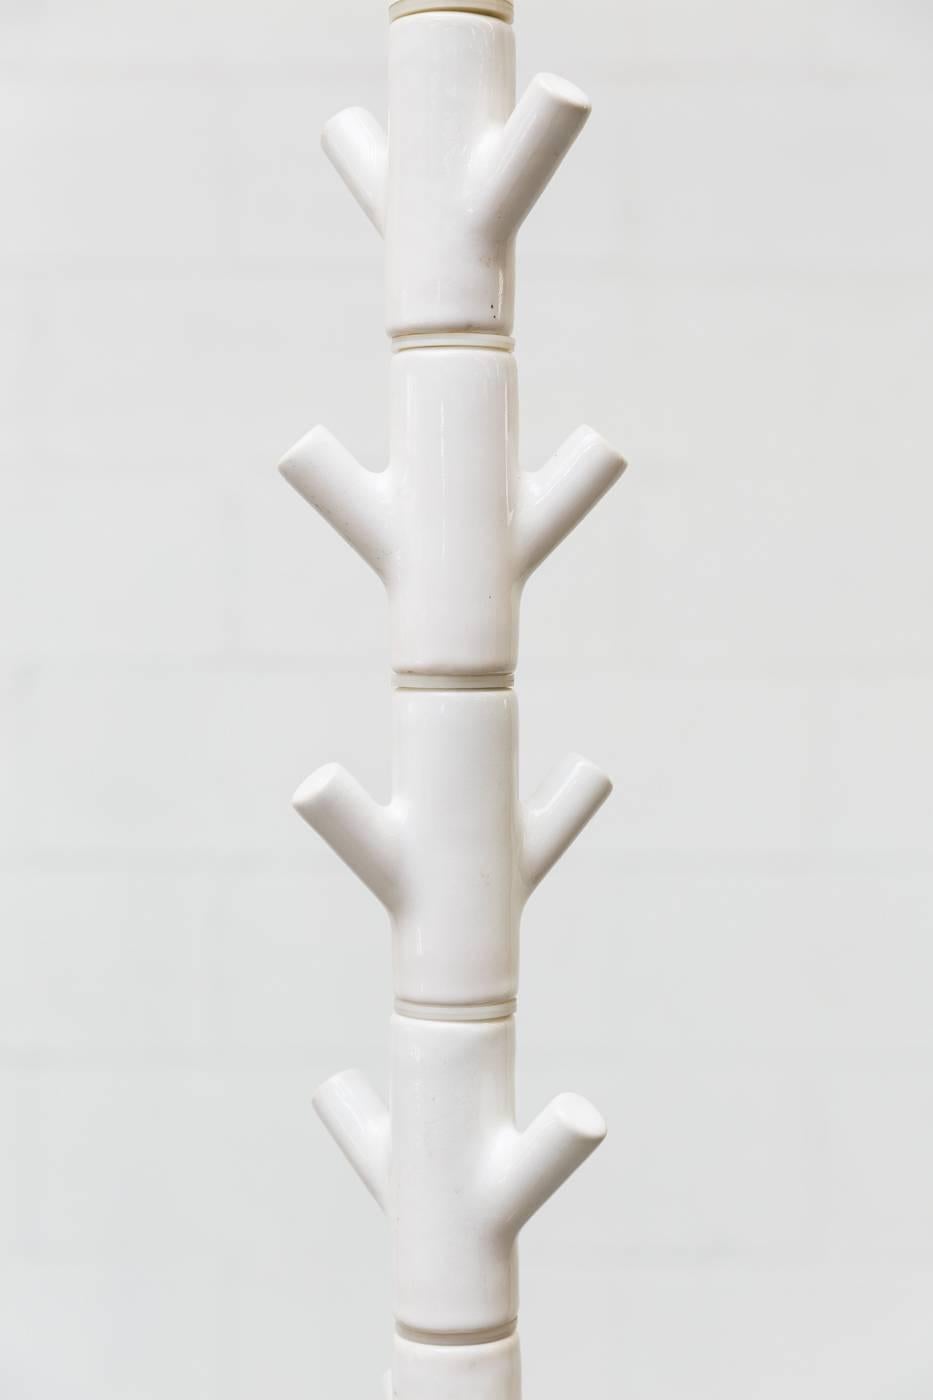 Very elegant and functional coat stand designed by Dutch designer, Richard Hutten. This was designed for, and manufactured by Planet in 2001 (no longer in production). As a promotional Product for Physicians. The spine shaped coat hooks are ceramic